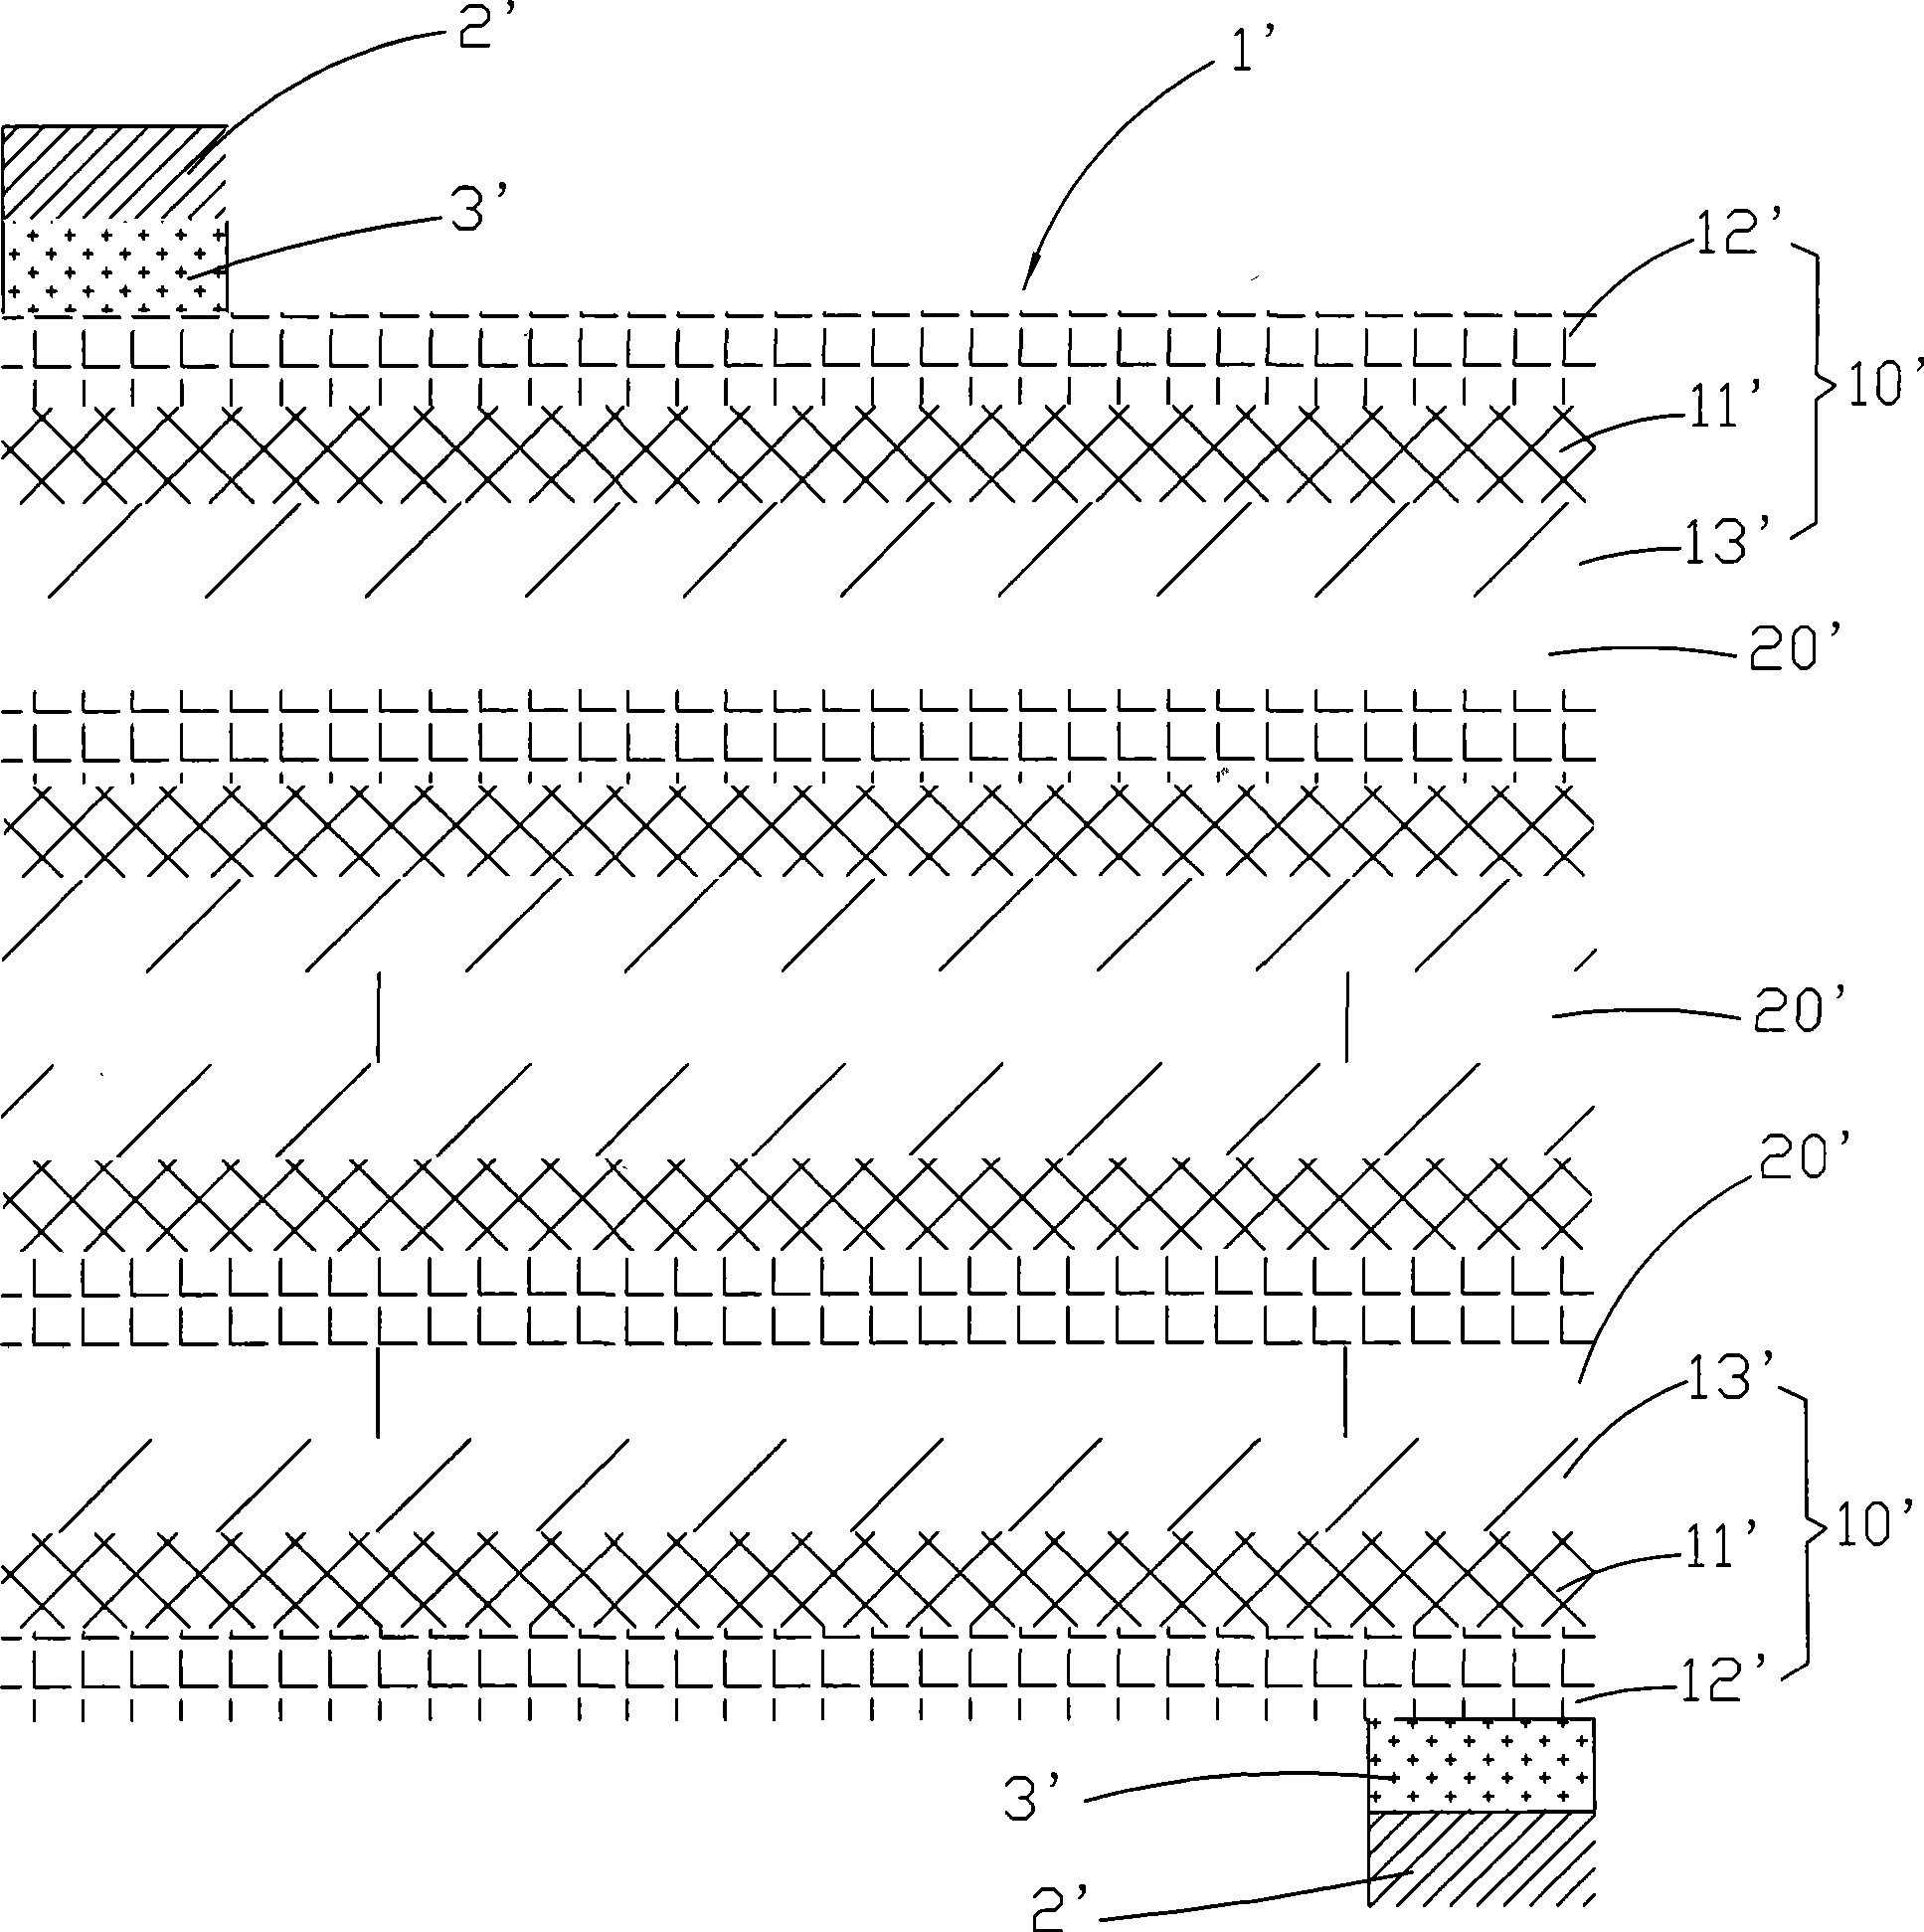 Multilayer flexible printed circuit board and method of manufacturing the same